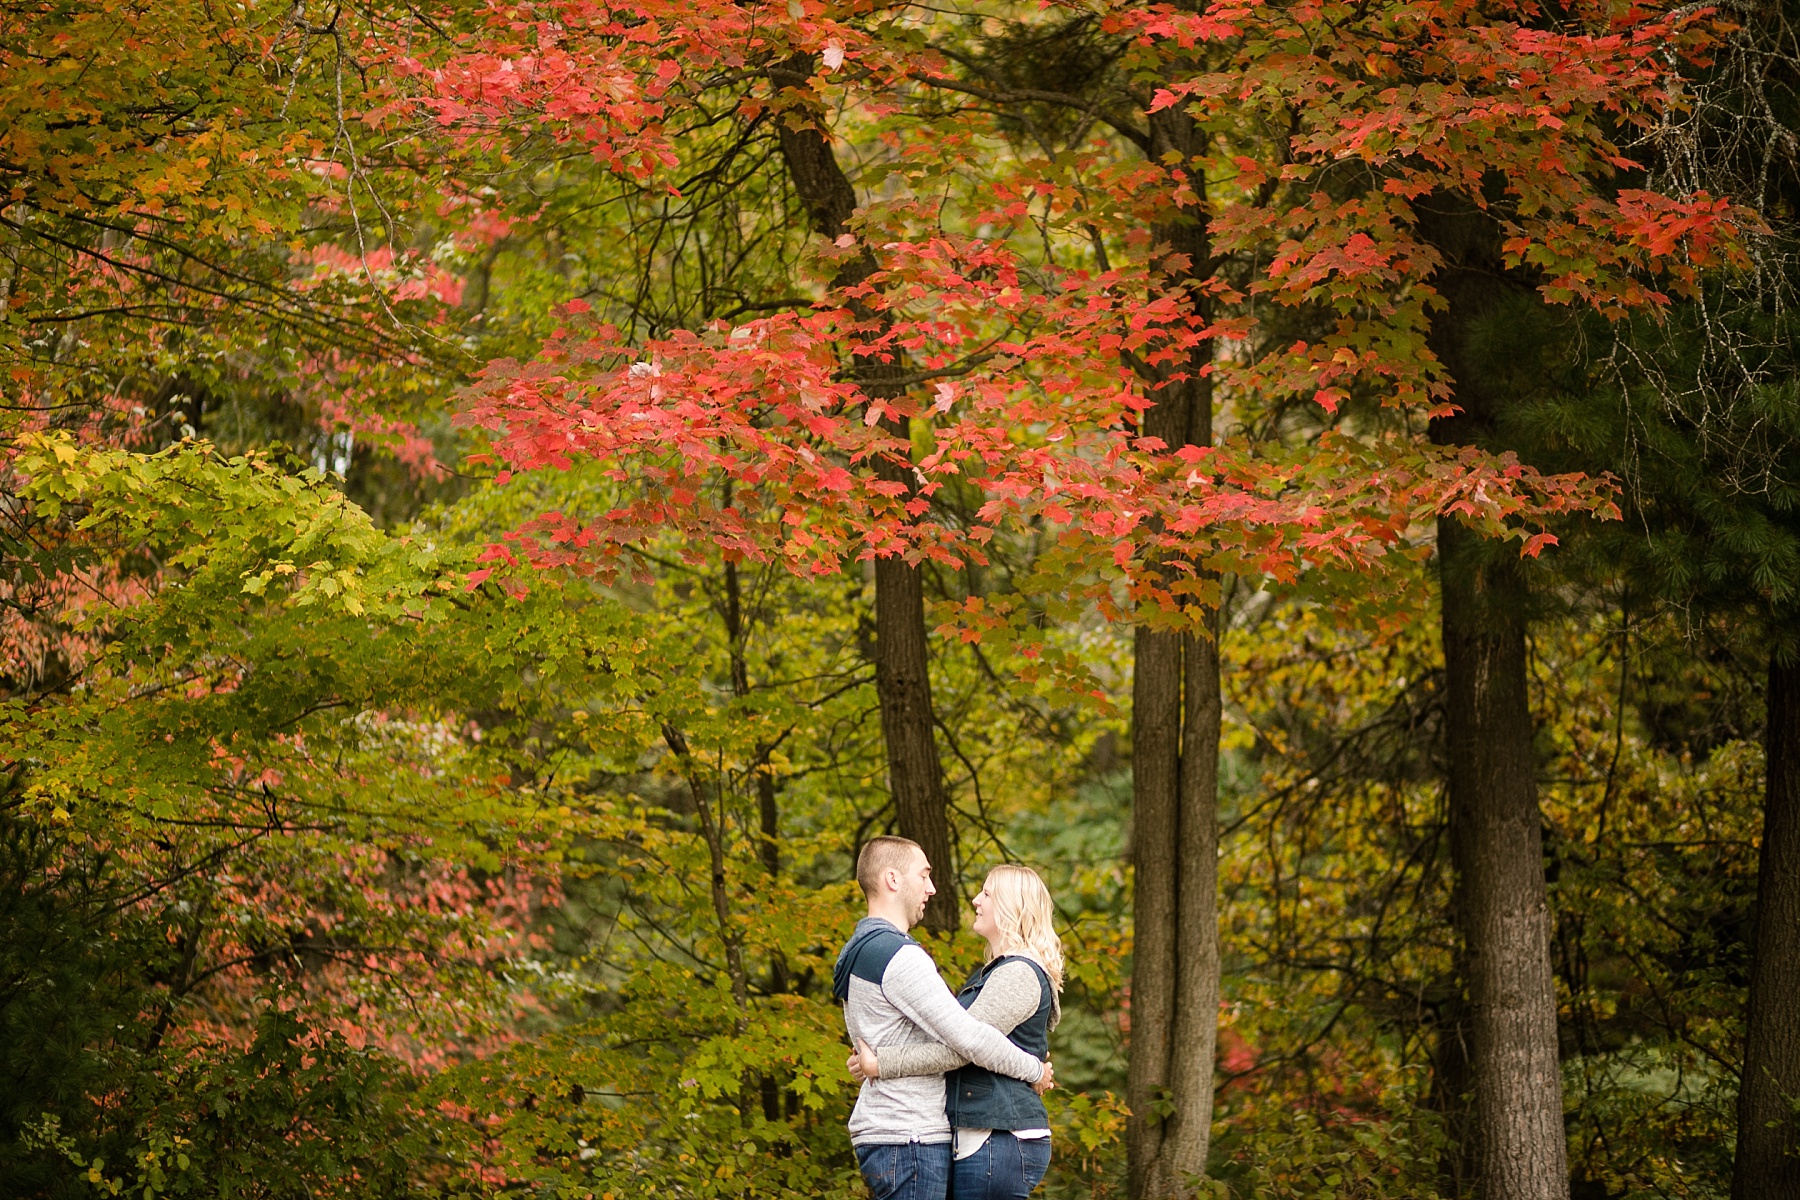 The leaves just starting to turn with vibrant colors, it was a perfect way to ease into fall with Danni & Anthony's fall engagement session in Chippewa Falls.